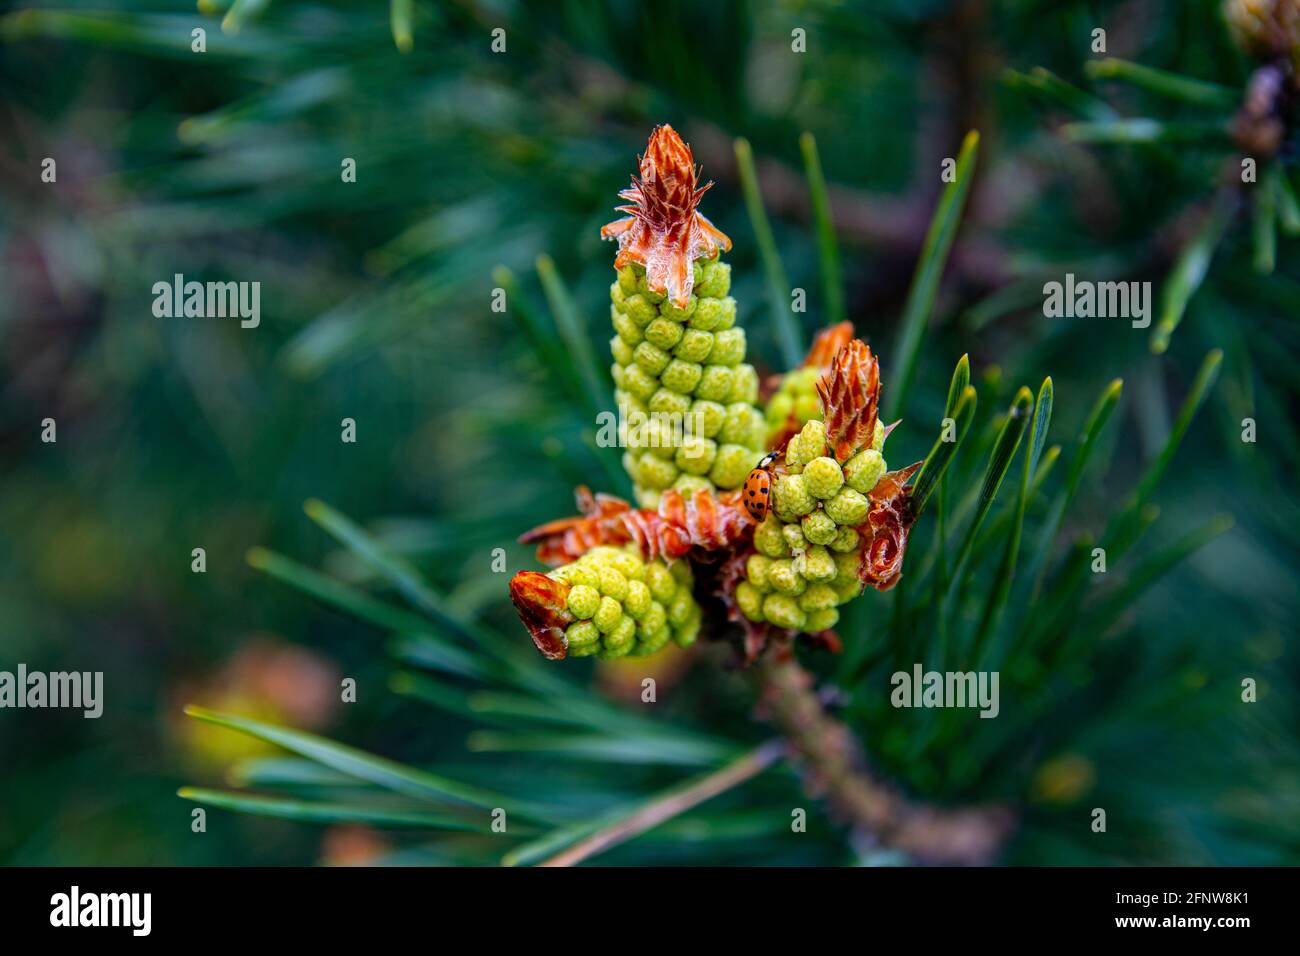 Young shoots and pine cones, green needles. Ladybug sits on pines cone. Spring day. Close-up image. Stock Photo